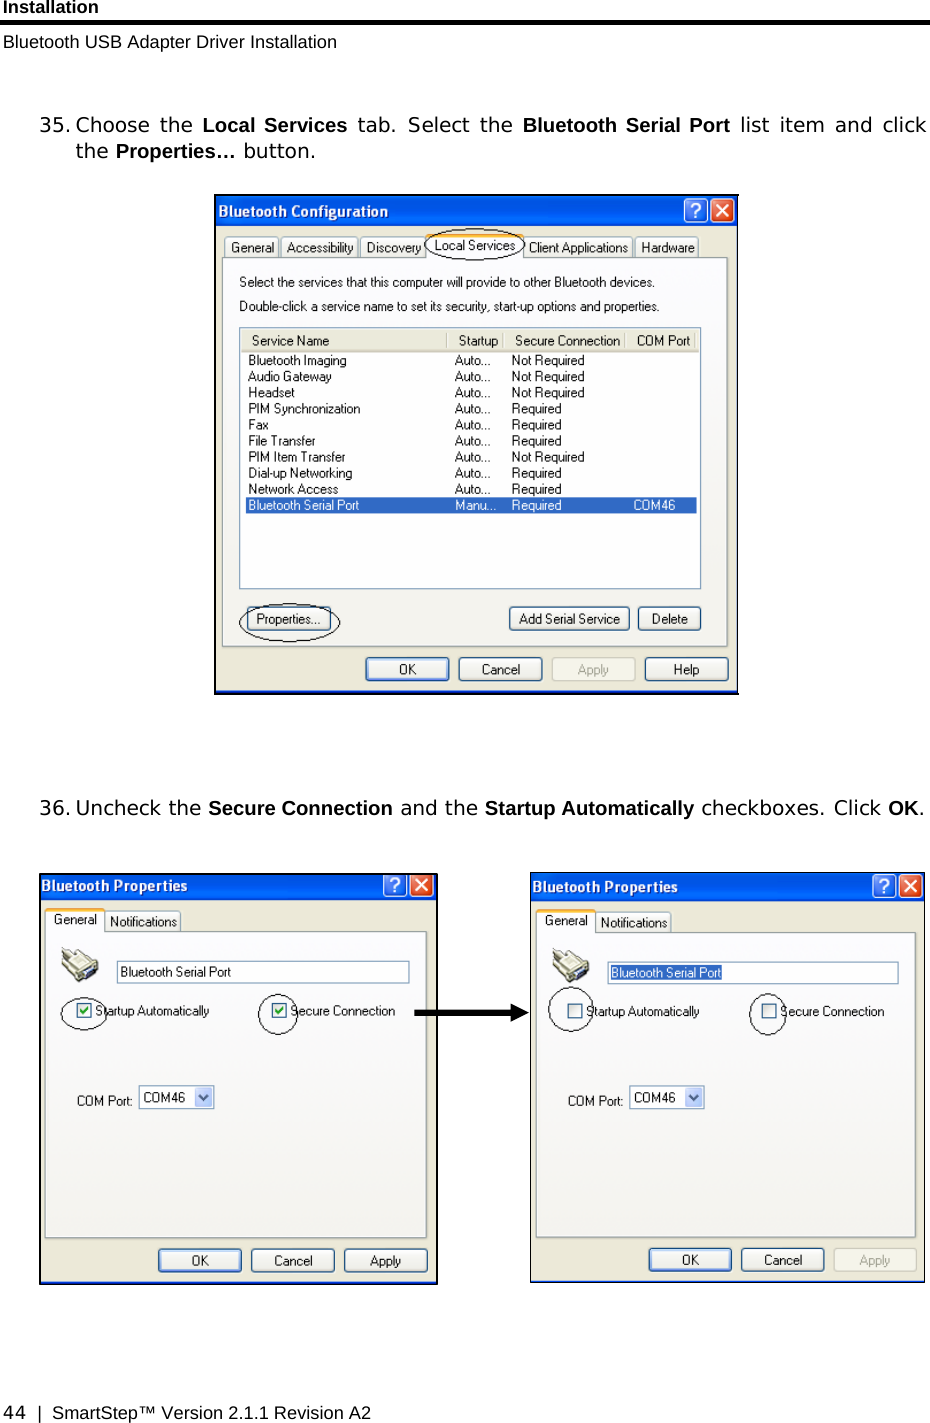 Installation Bluetooth USB Adapter Driver Installation  44  |  SmartStep™ Version 2.1.1 Revision A2  35. Choose the Local Services tab. Select the Bluetooth Serial Port list item and click the Properties… button.      36. Uncheck the Secure Connection and the Startup Automatically checkboxes. Click OK.        